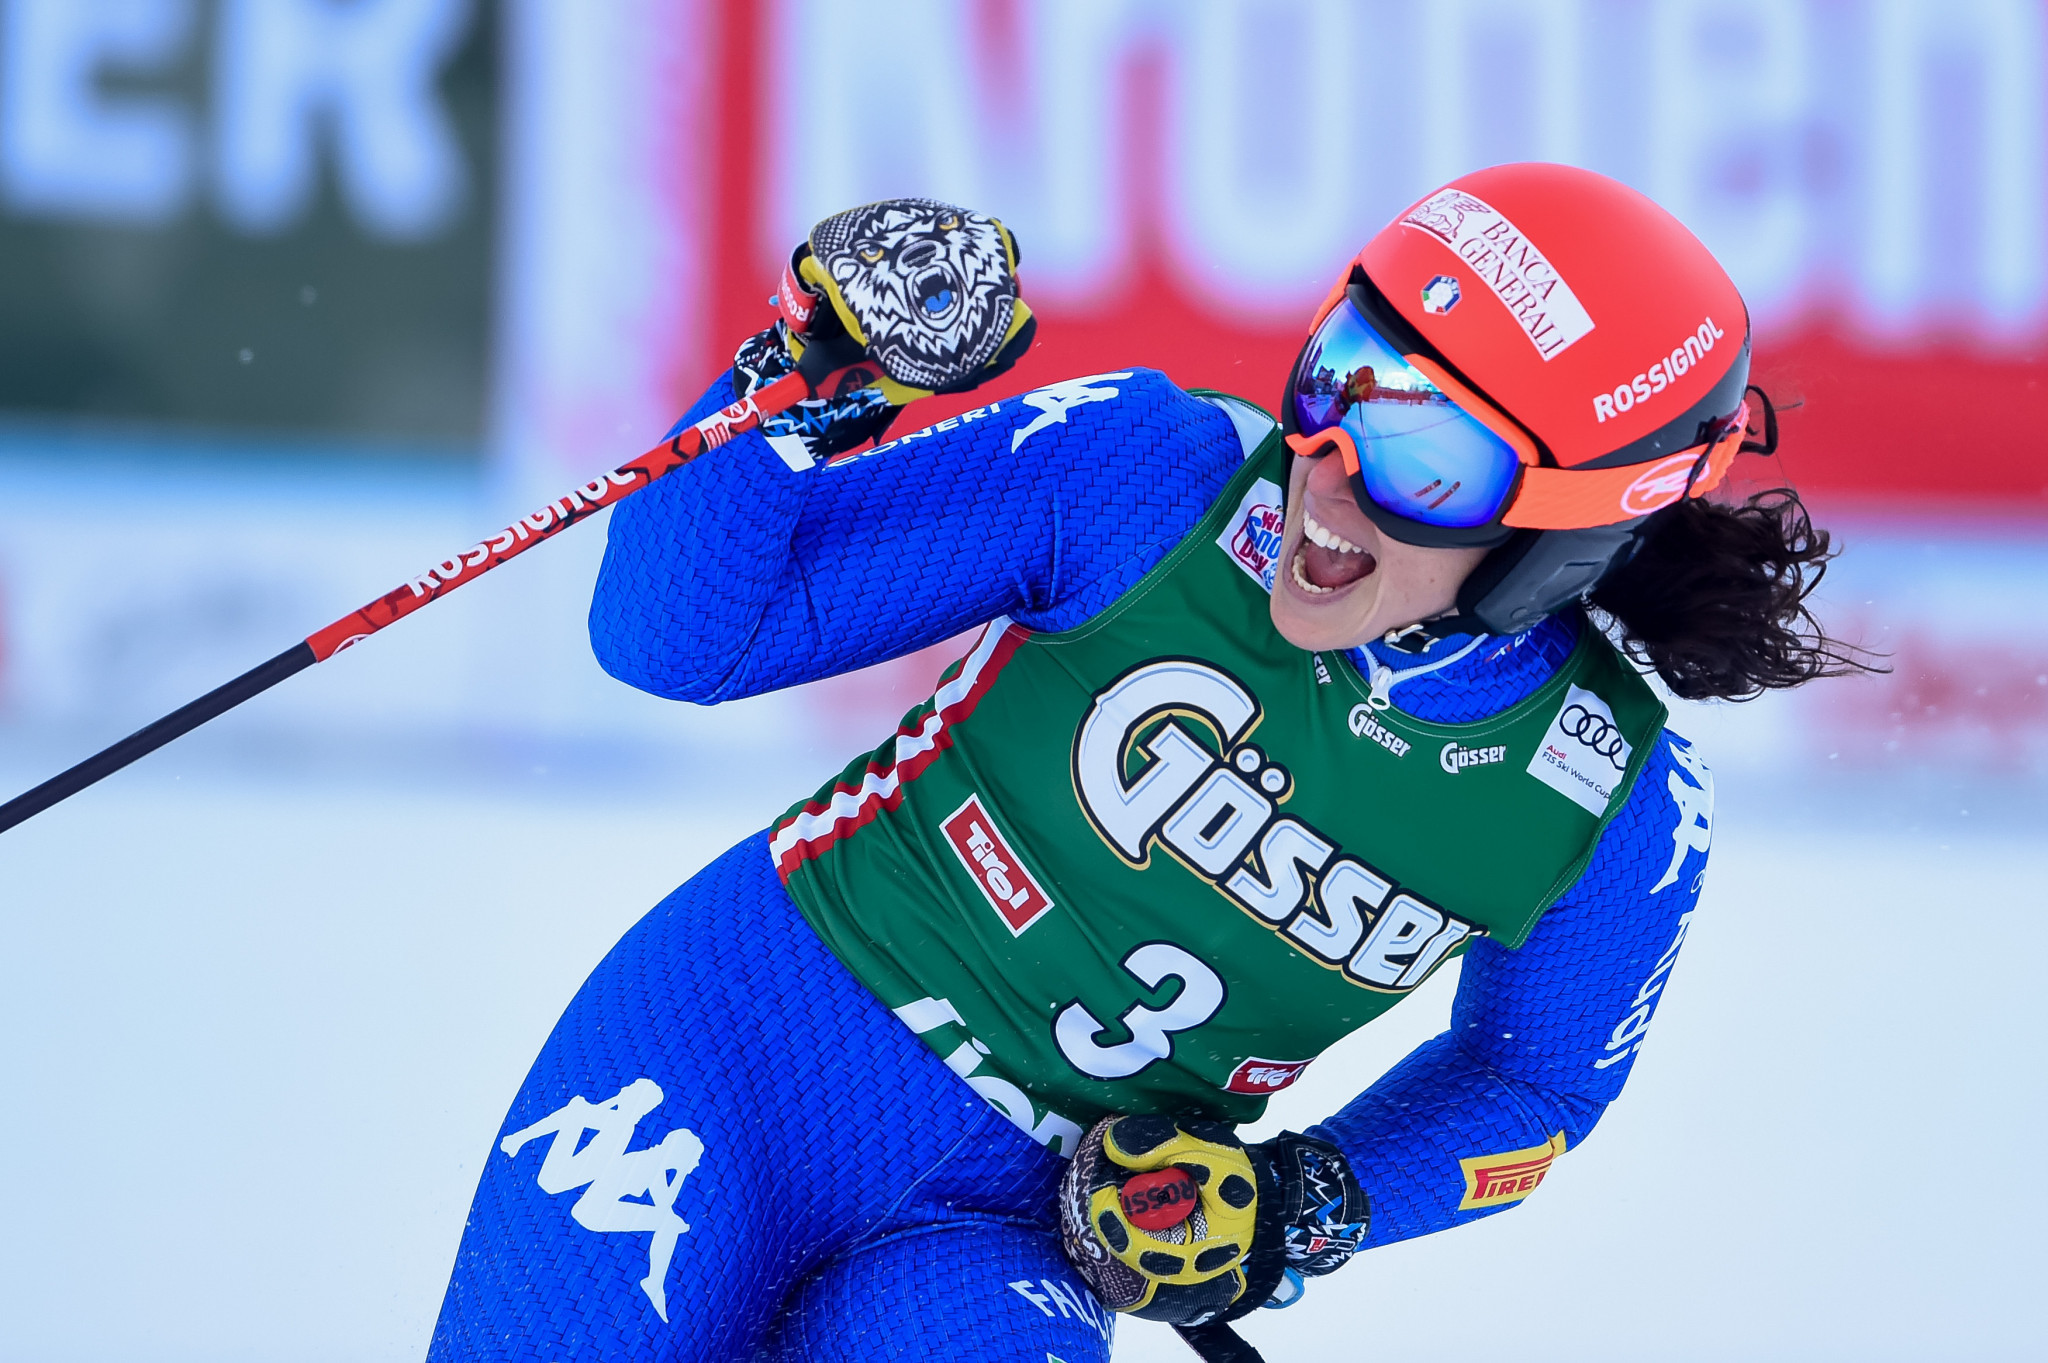 Federica Brignone won the second super-G title of her career with victory in Bad Kleinkirchheim ©Getty Images